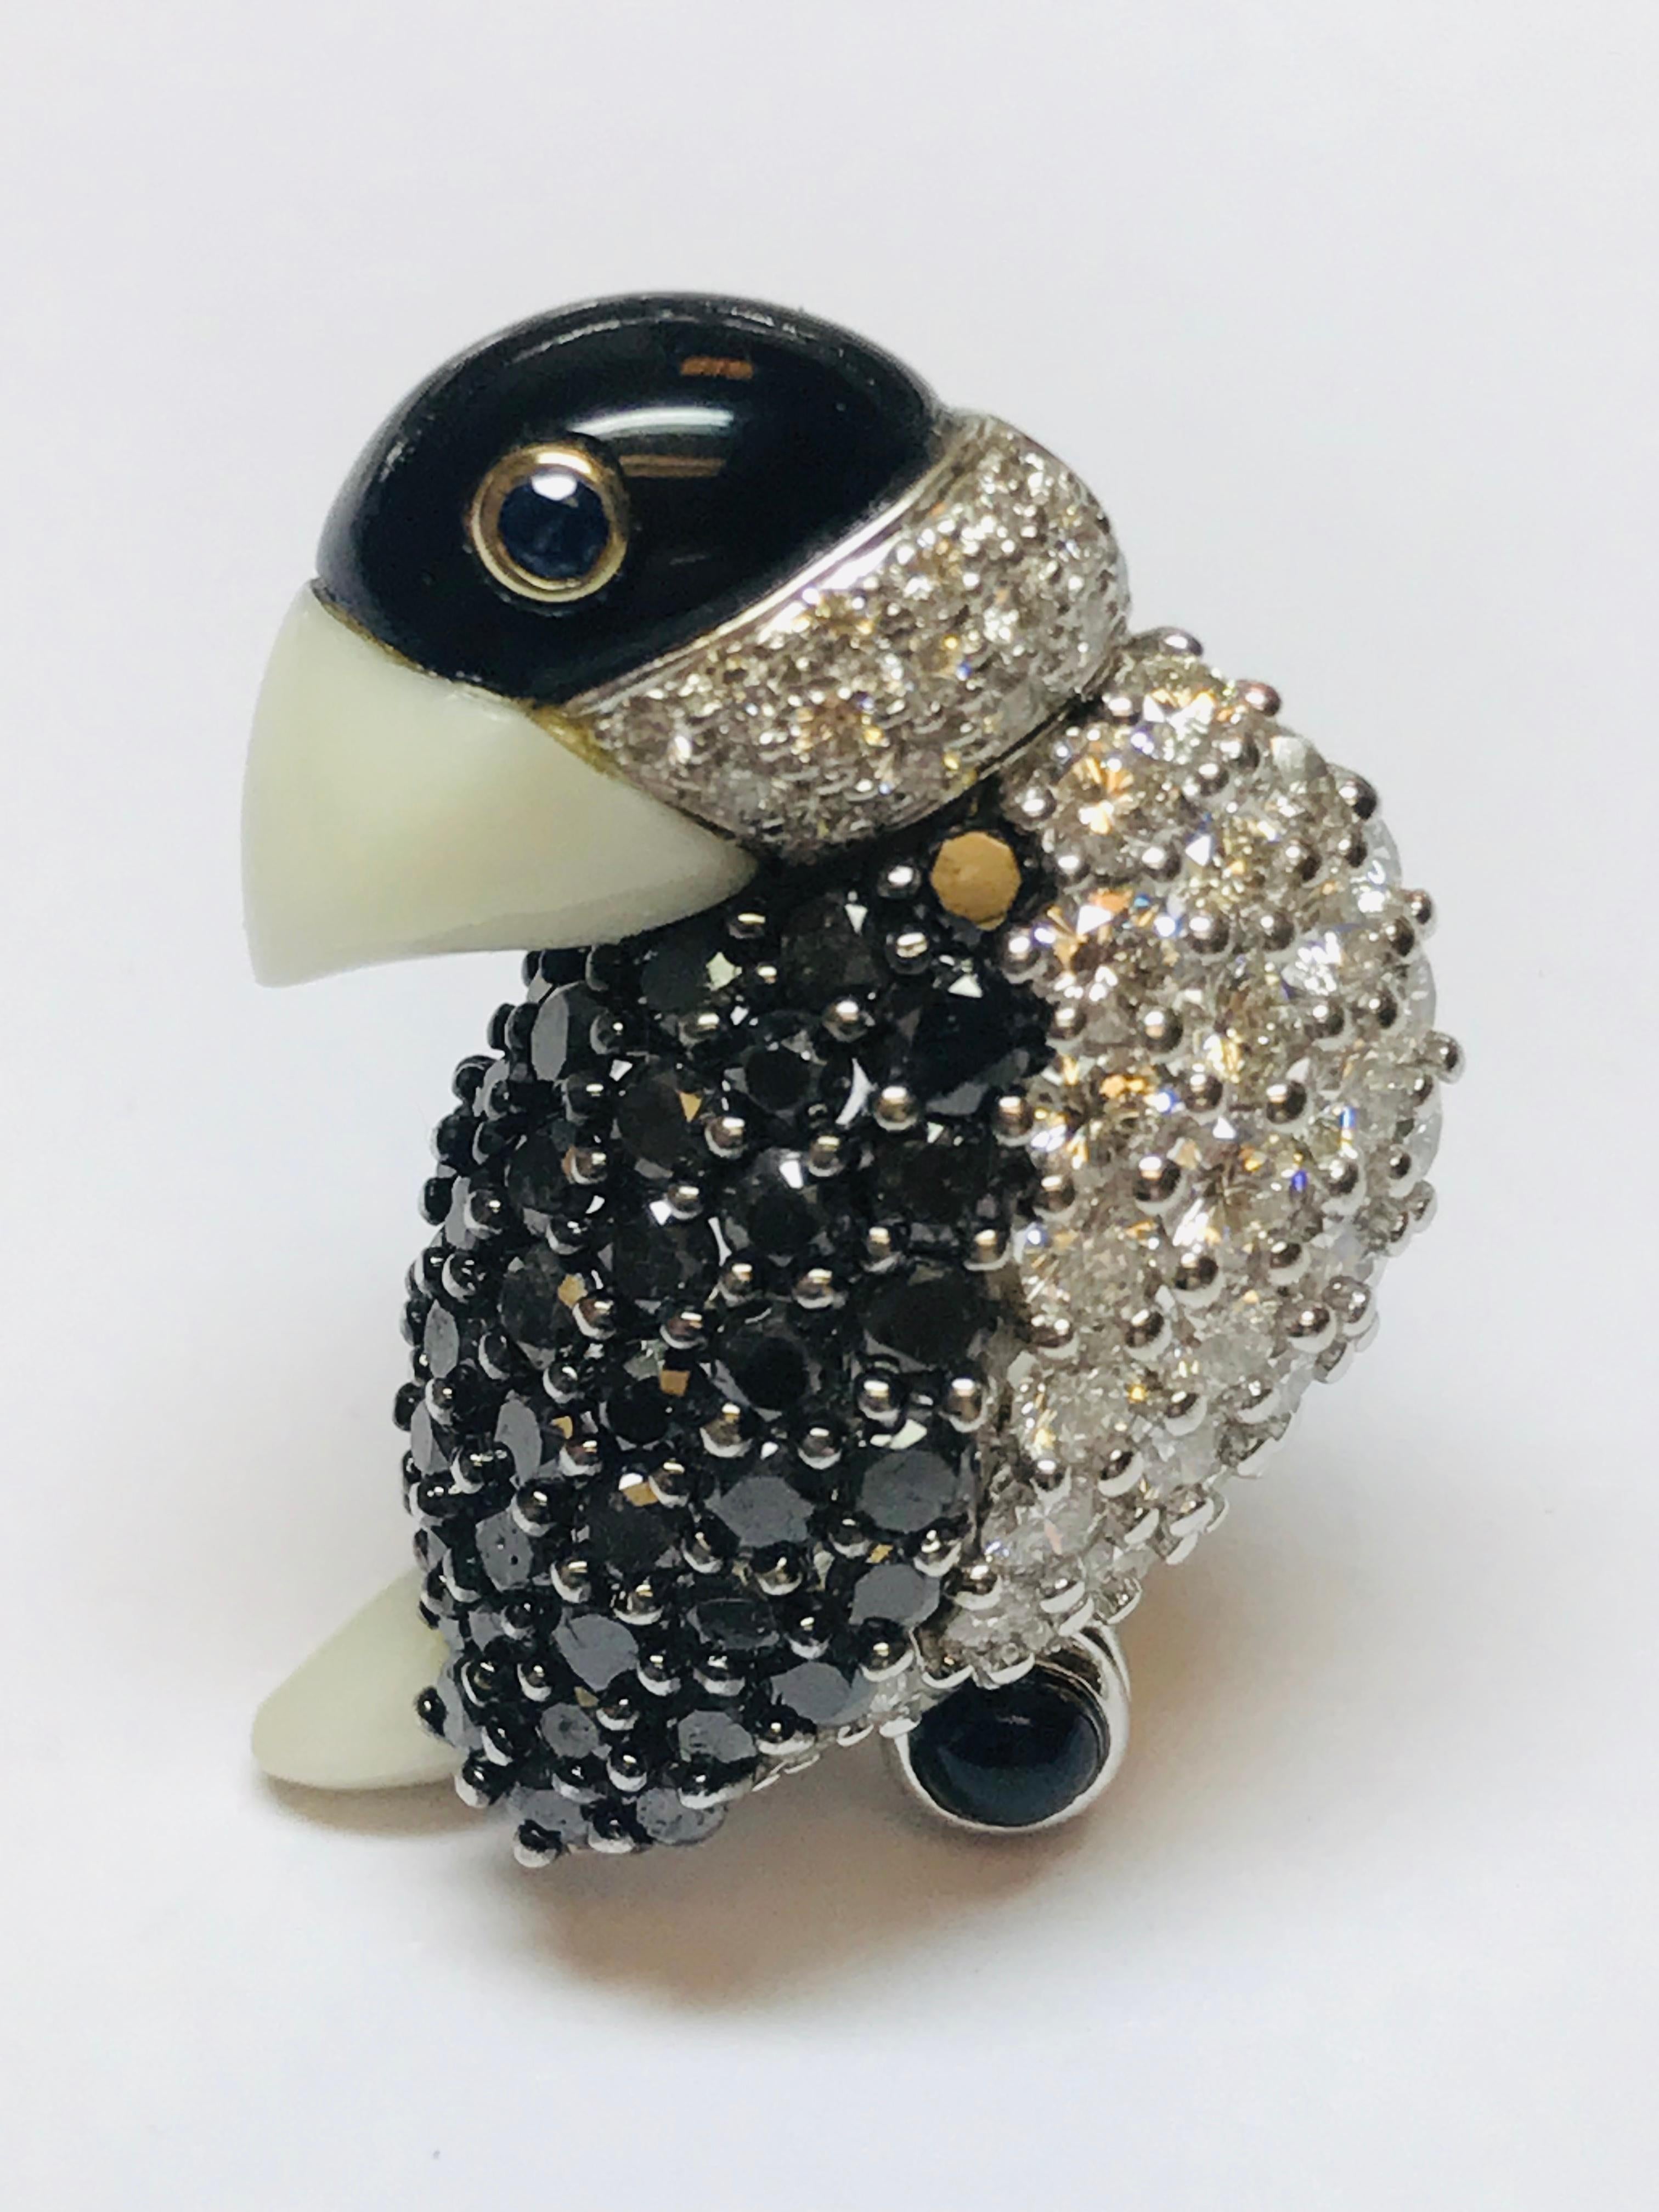 This tropical bird combines 2.23 carats of white diamonds and 2.47 carats of Black diamond, with a white Opal beak and tail, Black Onyx head and Blue Sapphire eye set in 18K white gold! EXQUISITE!!! This piece is also a pendant. 